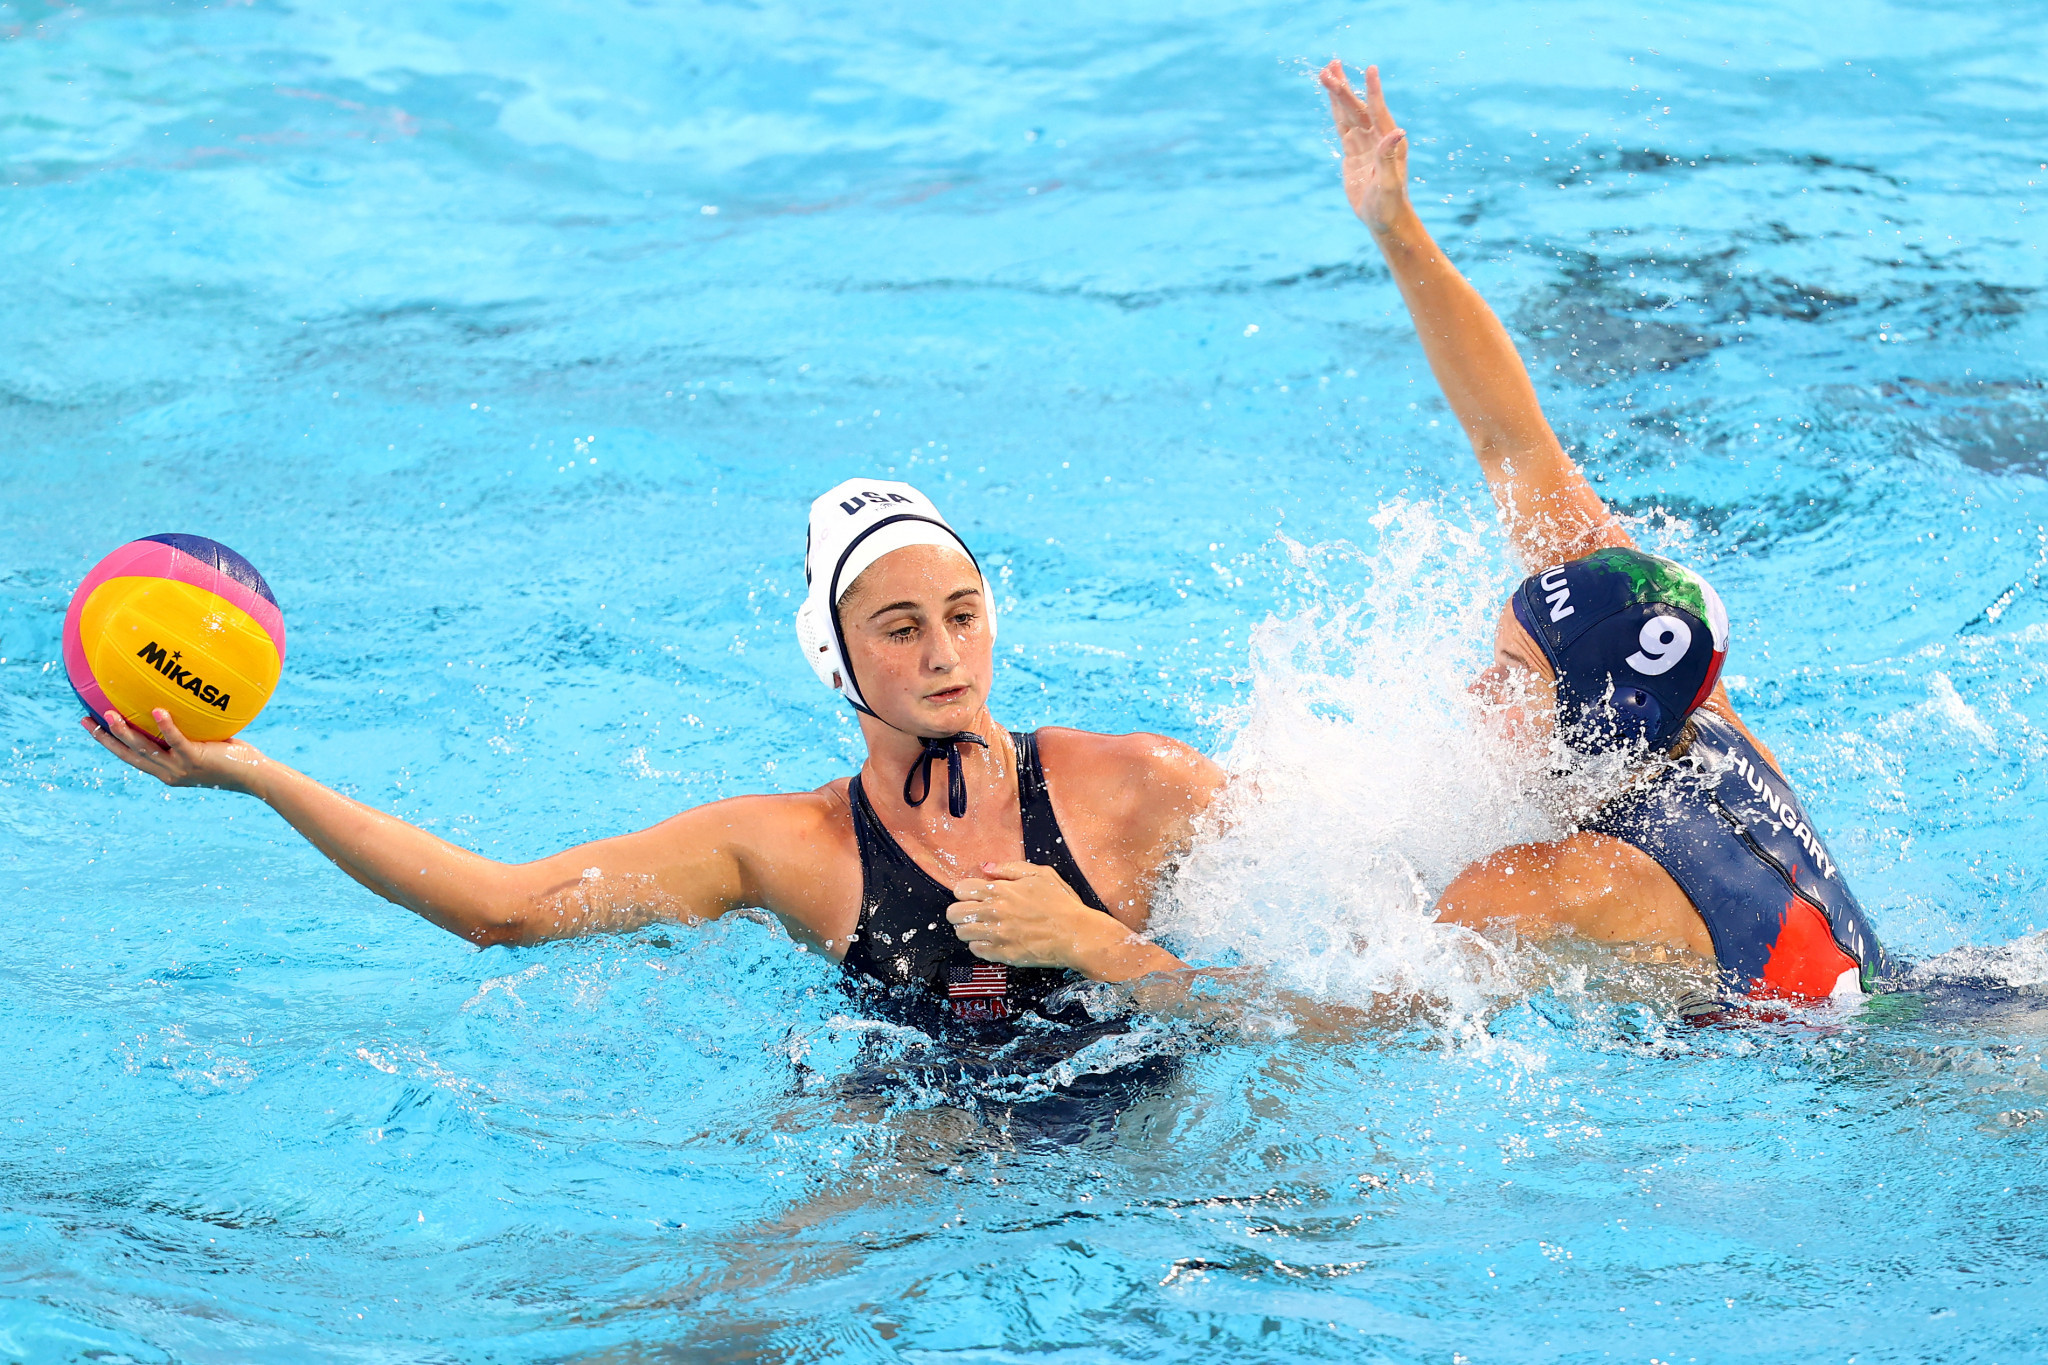 Madeline Musselman, left, scored five times for the US in their 9-7 victory over Hungary ©Getty Images